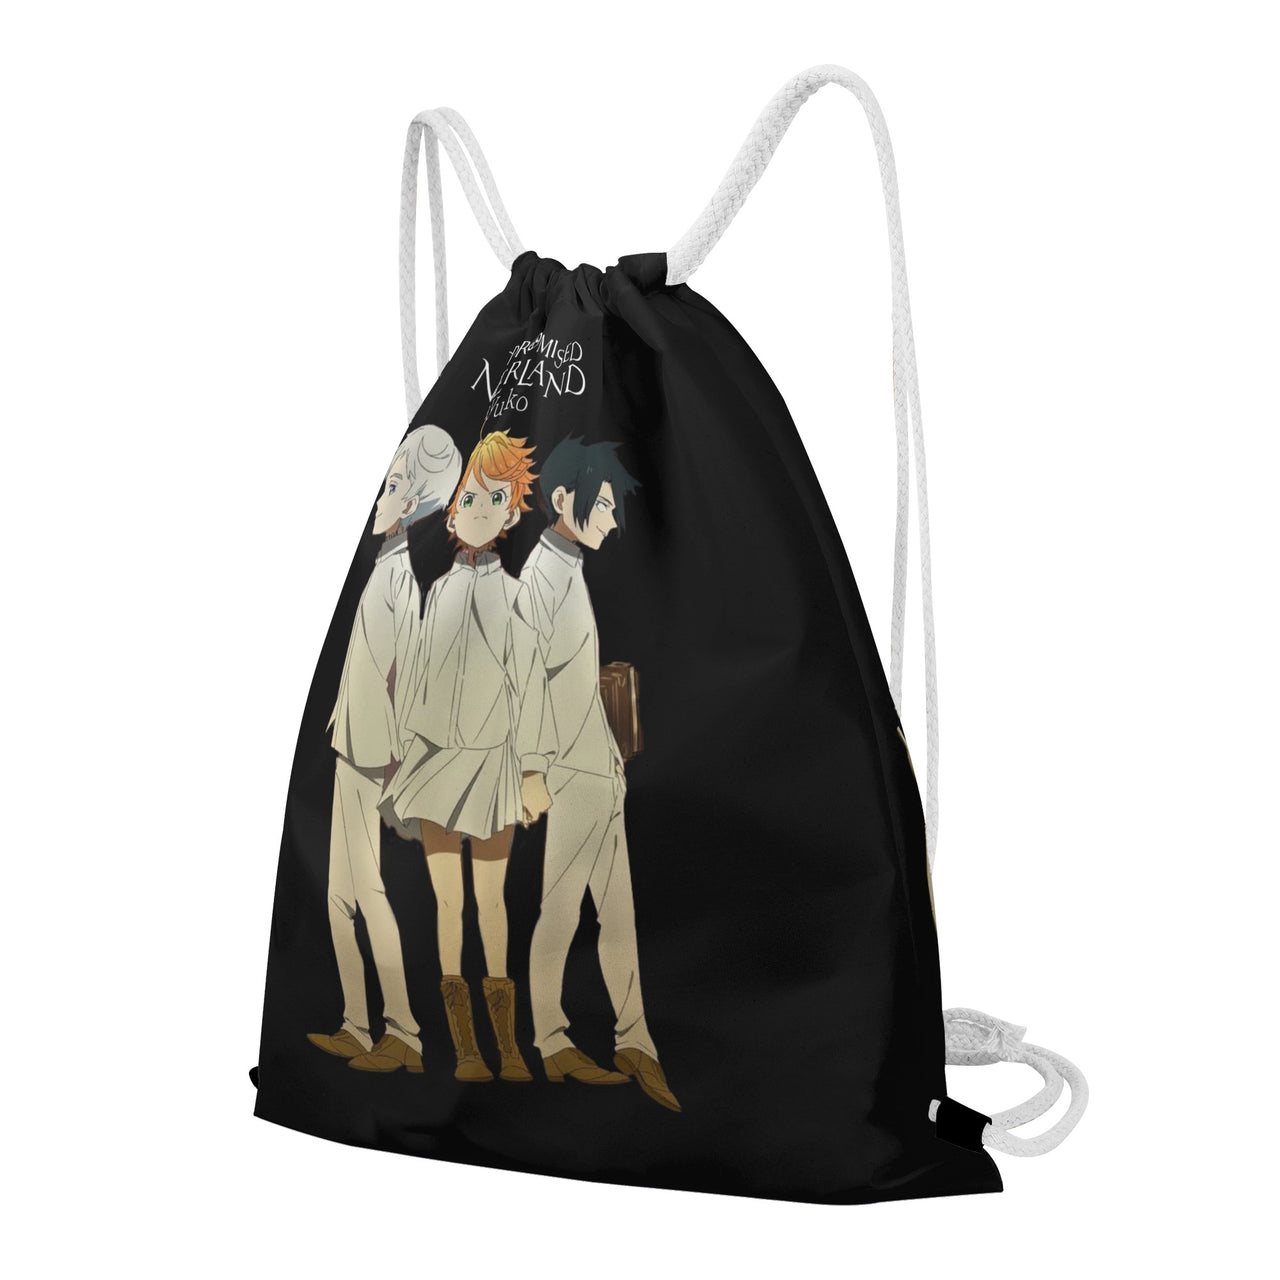 Borsa con coulisse The Promised Neverland Anime